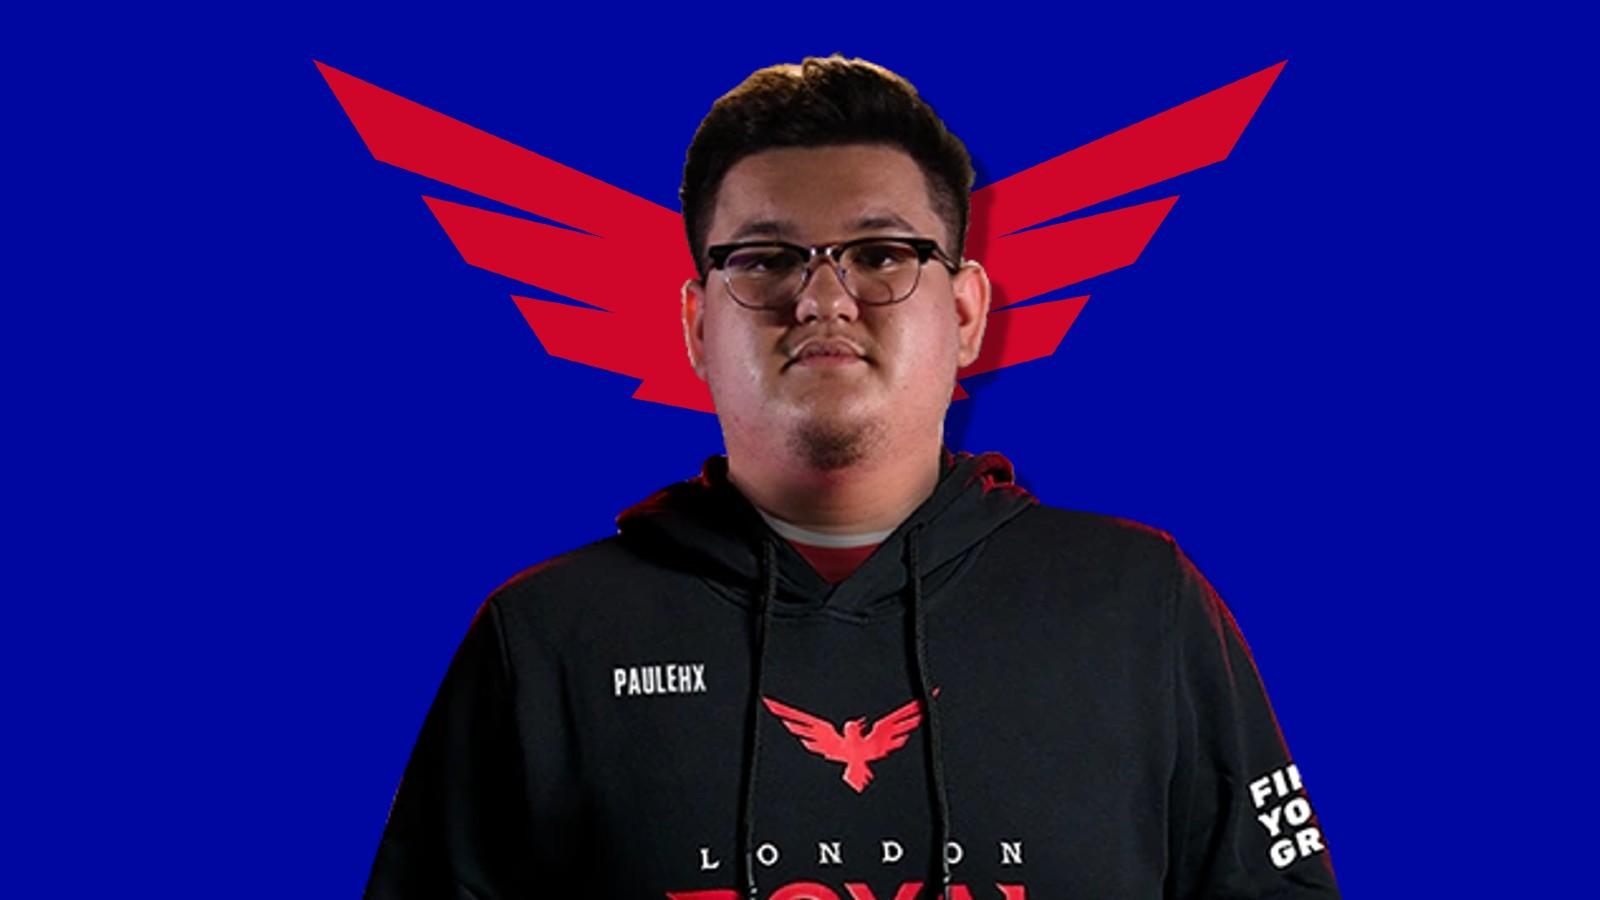 PaulEhx, who previously started for the London Royal Ravens, rejoins the squad ahead of Major 2.